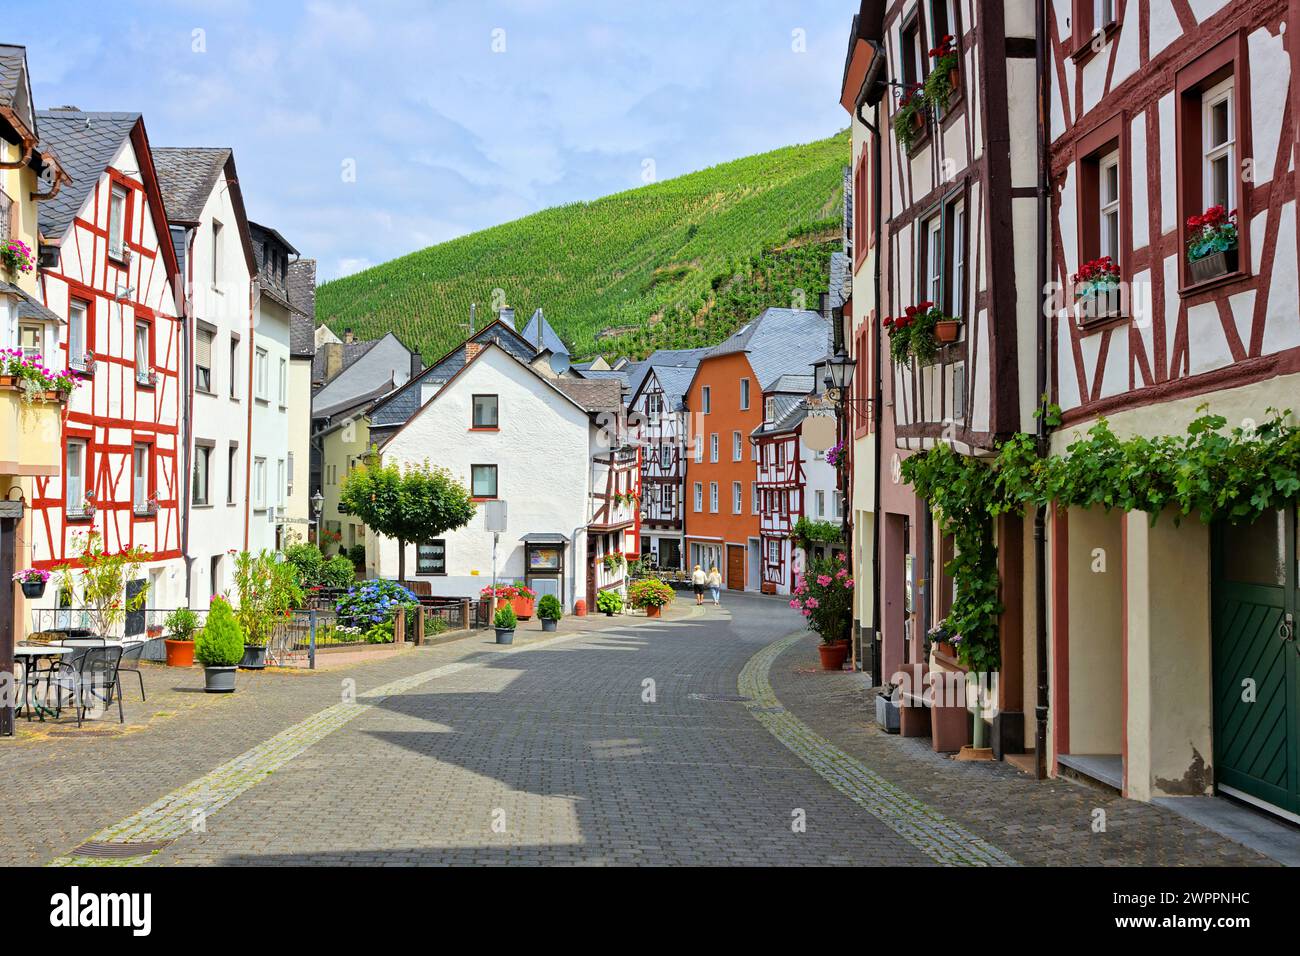 Beautiful street of traditional half timbered buildings in the town of Bernkastel Kues, Germany Stock Photo